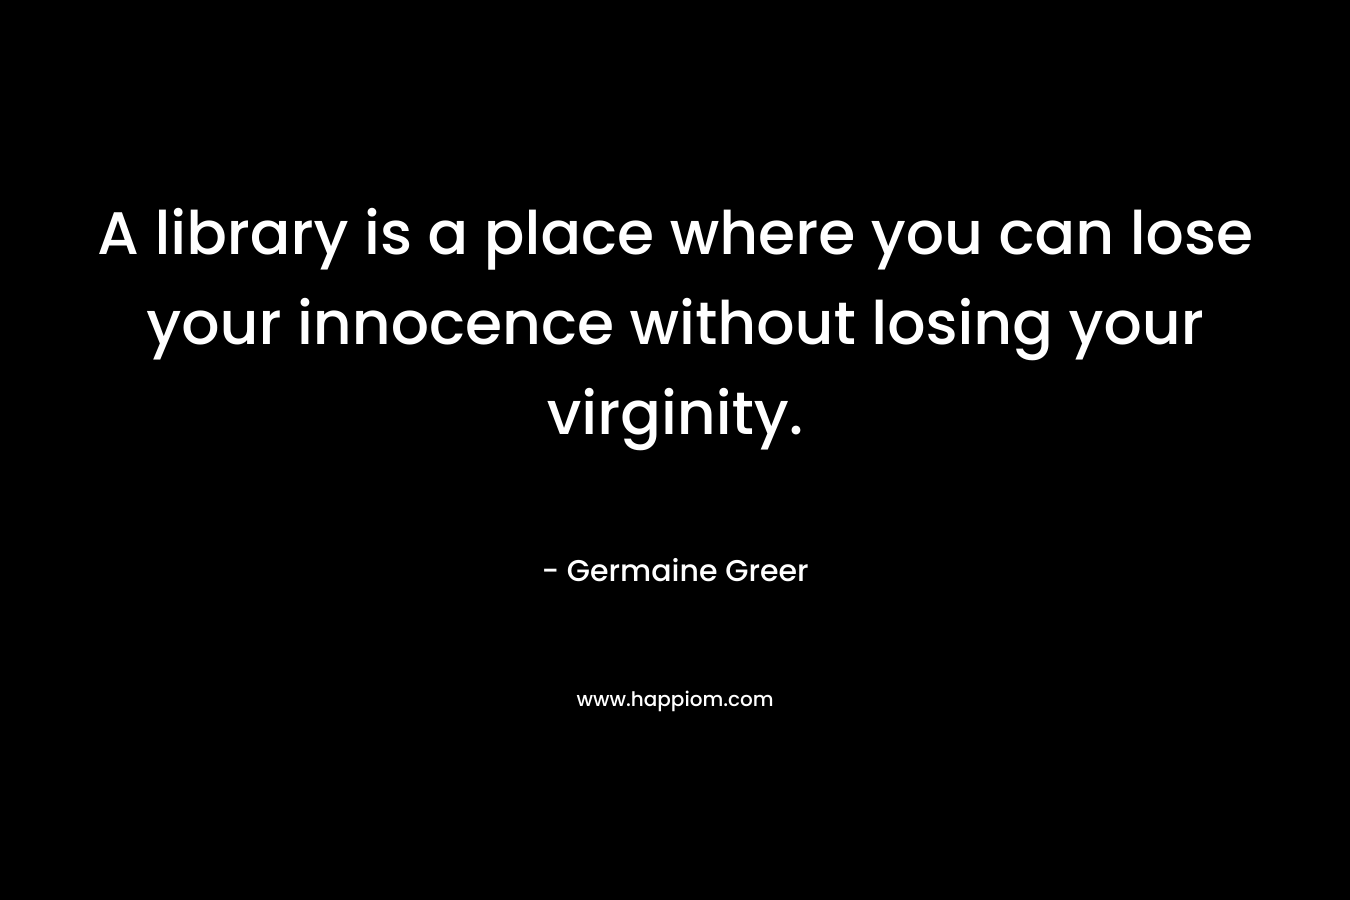 A library is a place where you can lose your innocence without losing your virginity.